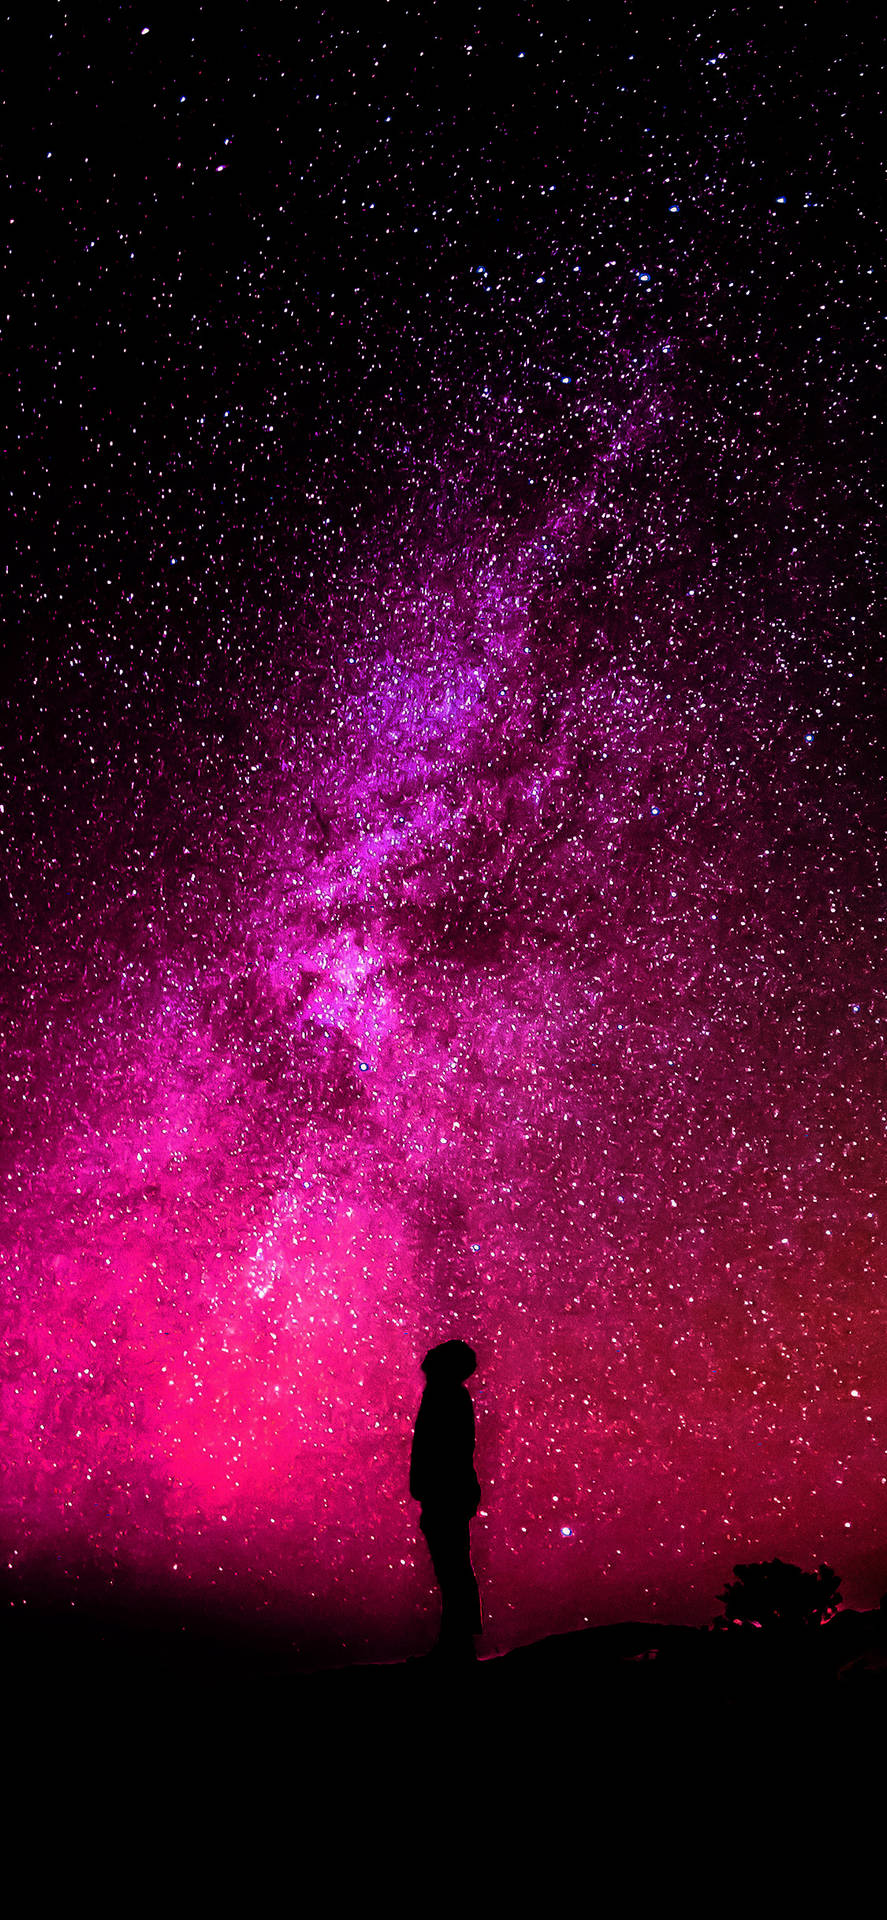 Man Silhouette Over Pink Galaxy Iphone Wallpaper